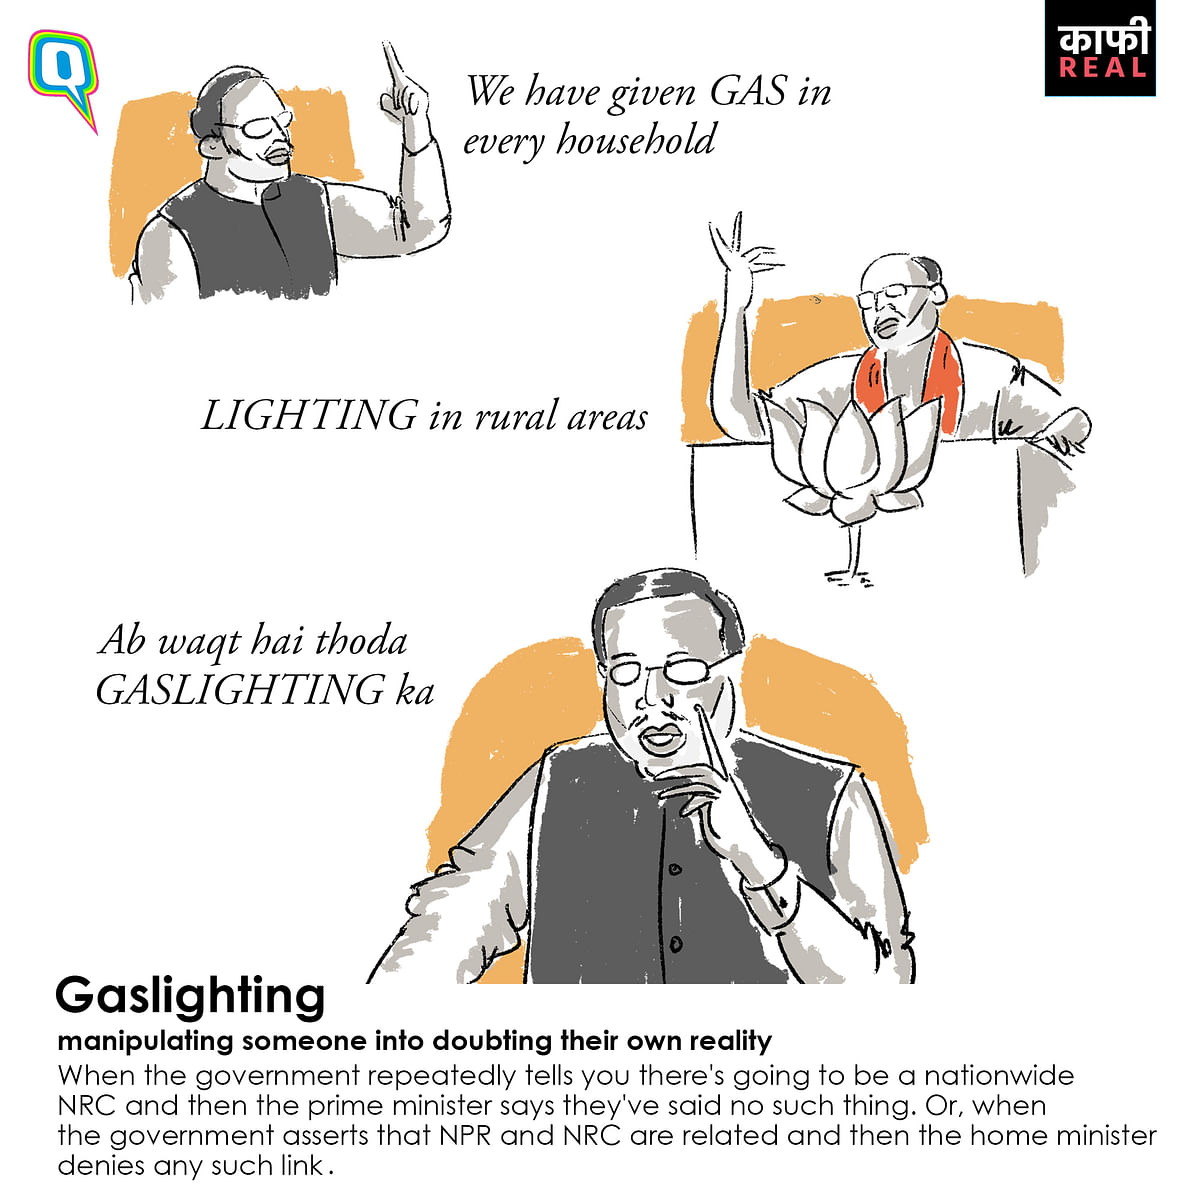 Gaslighting: manipulating someone (or the people of your country) into doubting their own reality. 